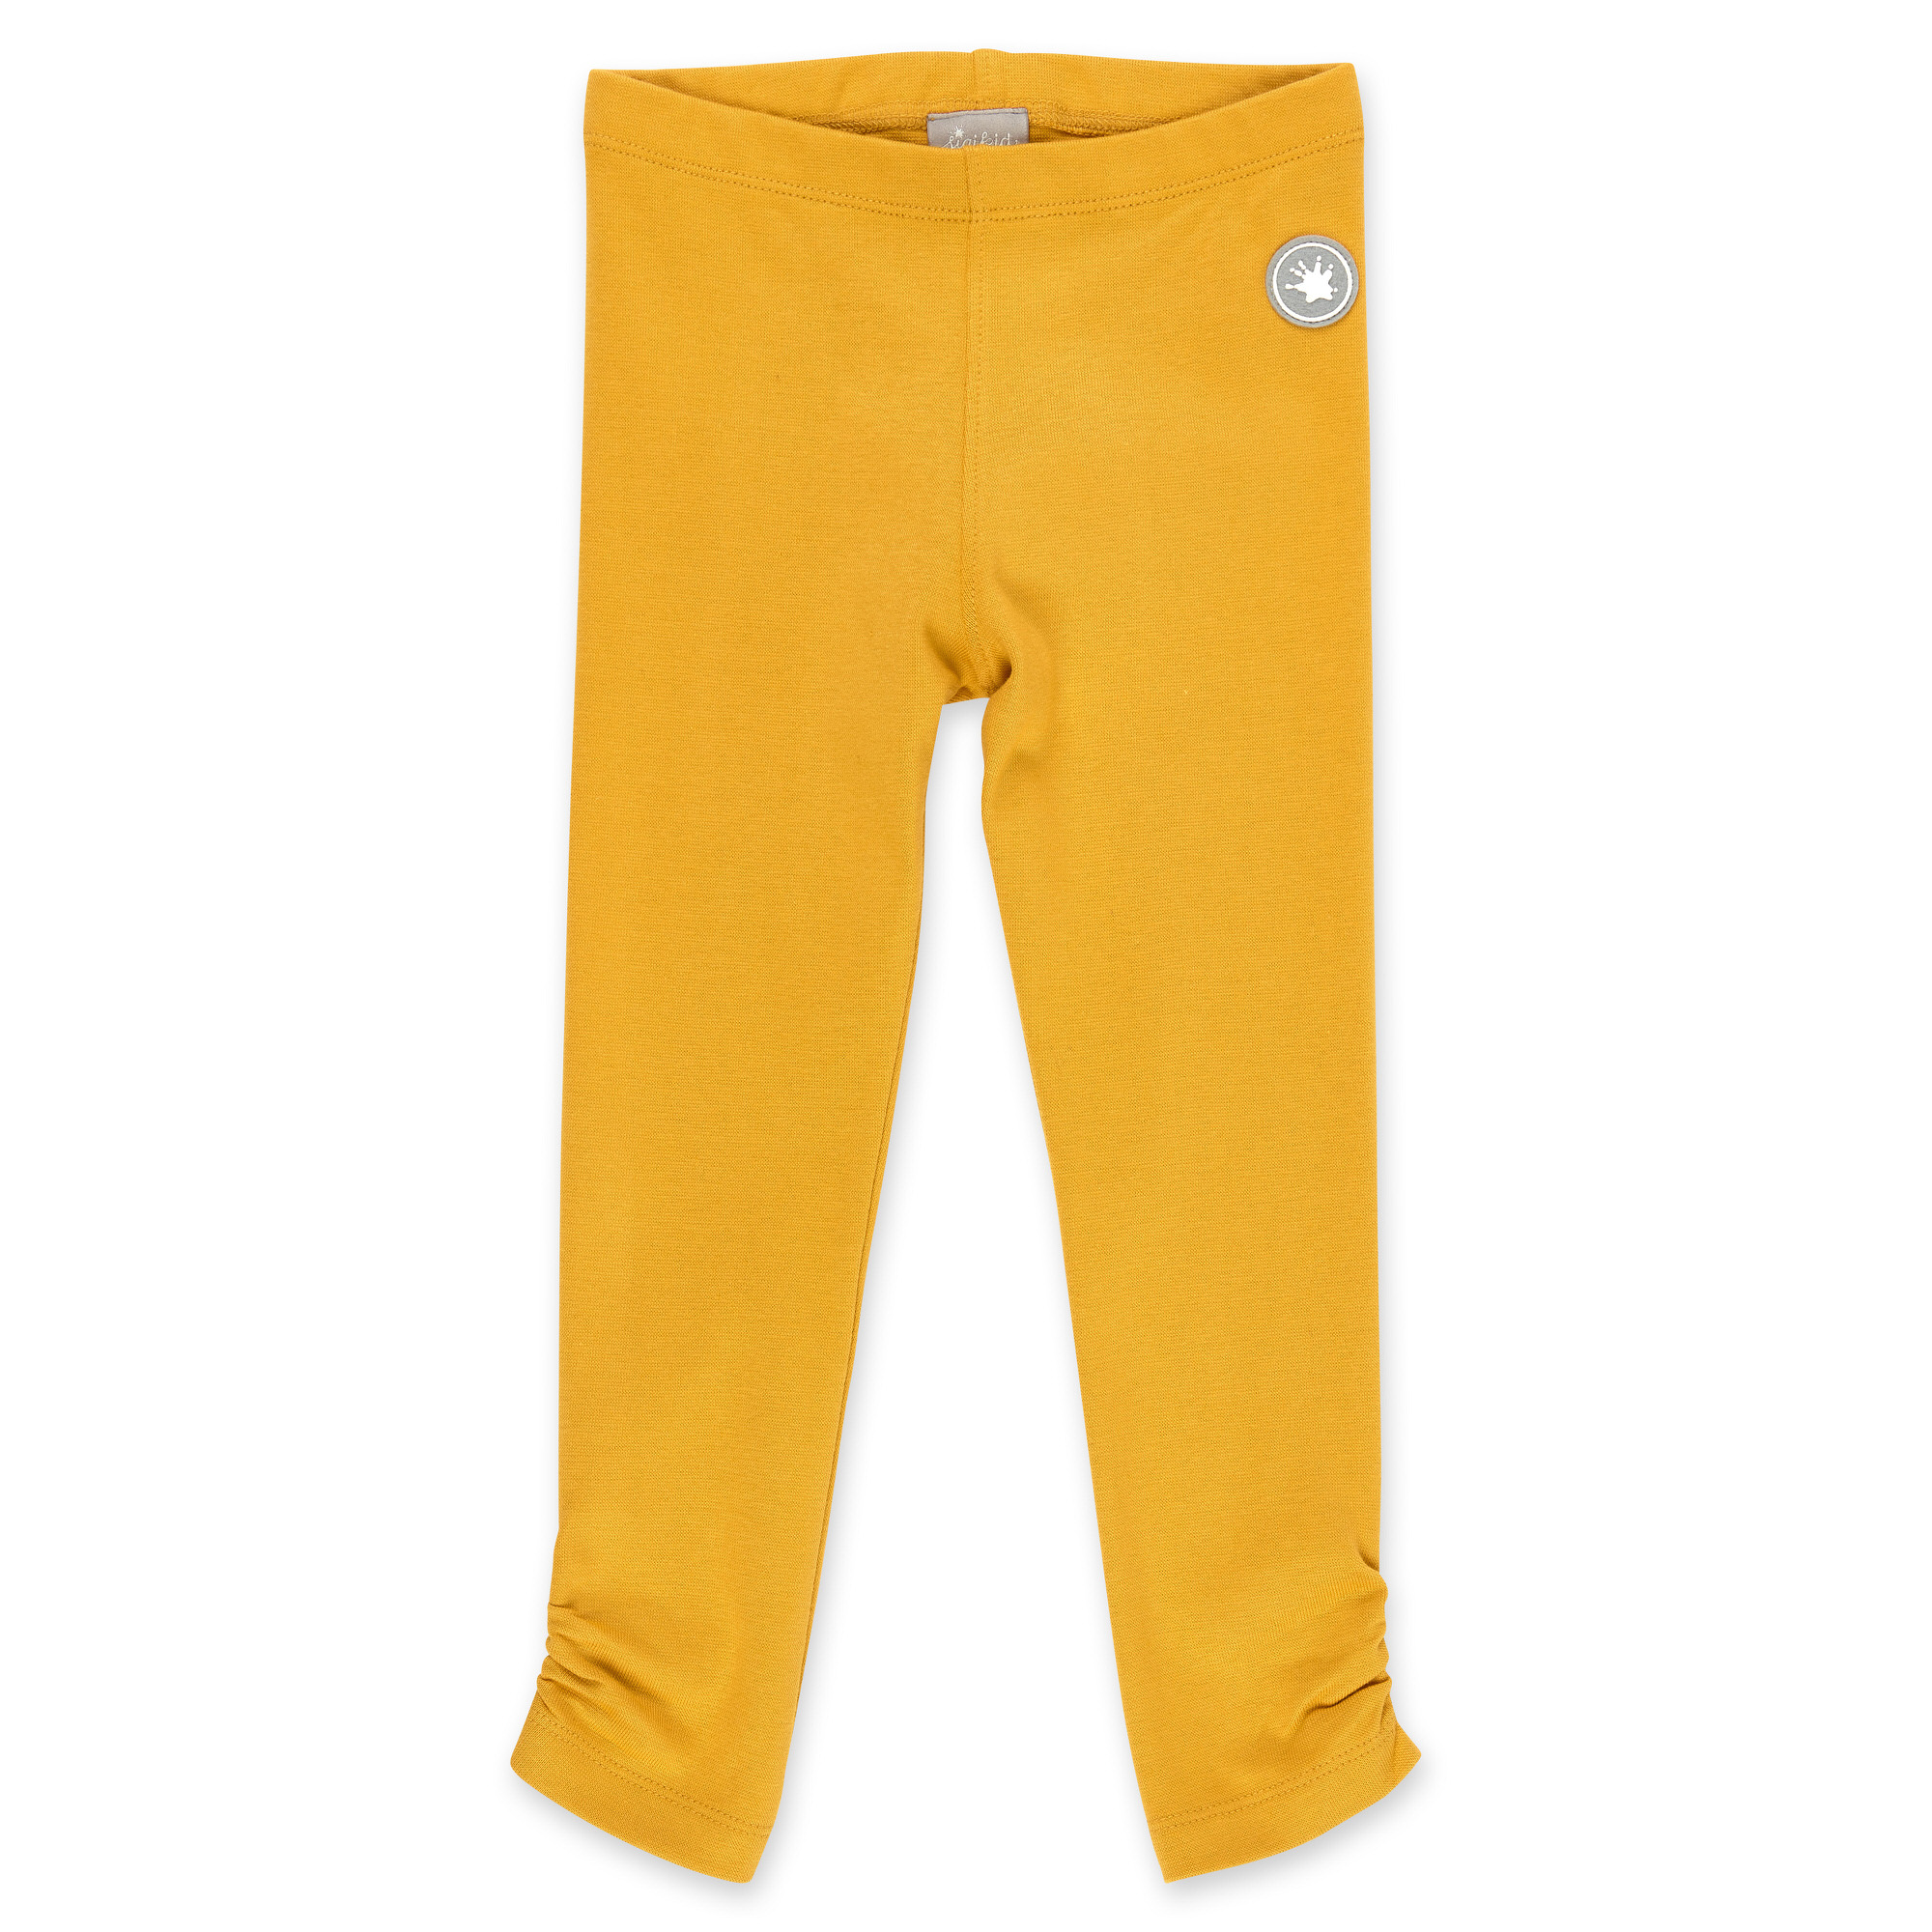 Yellow children's rib knit leggings with ankle gatherings